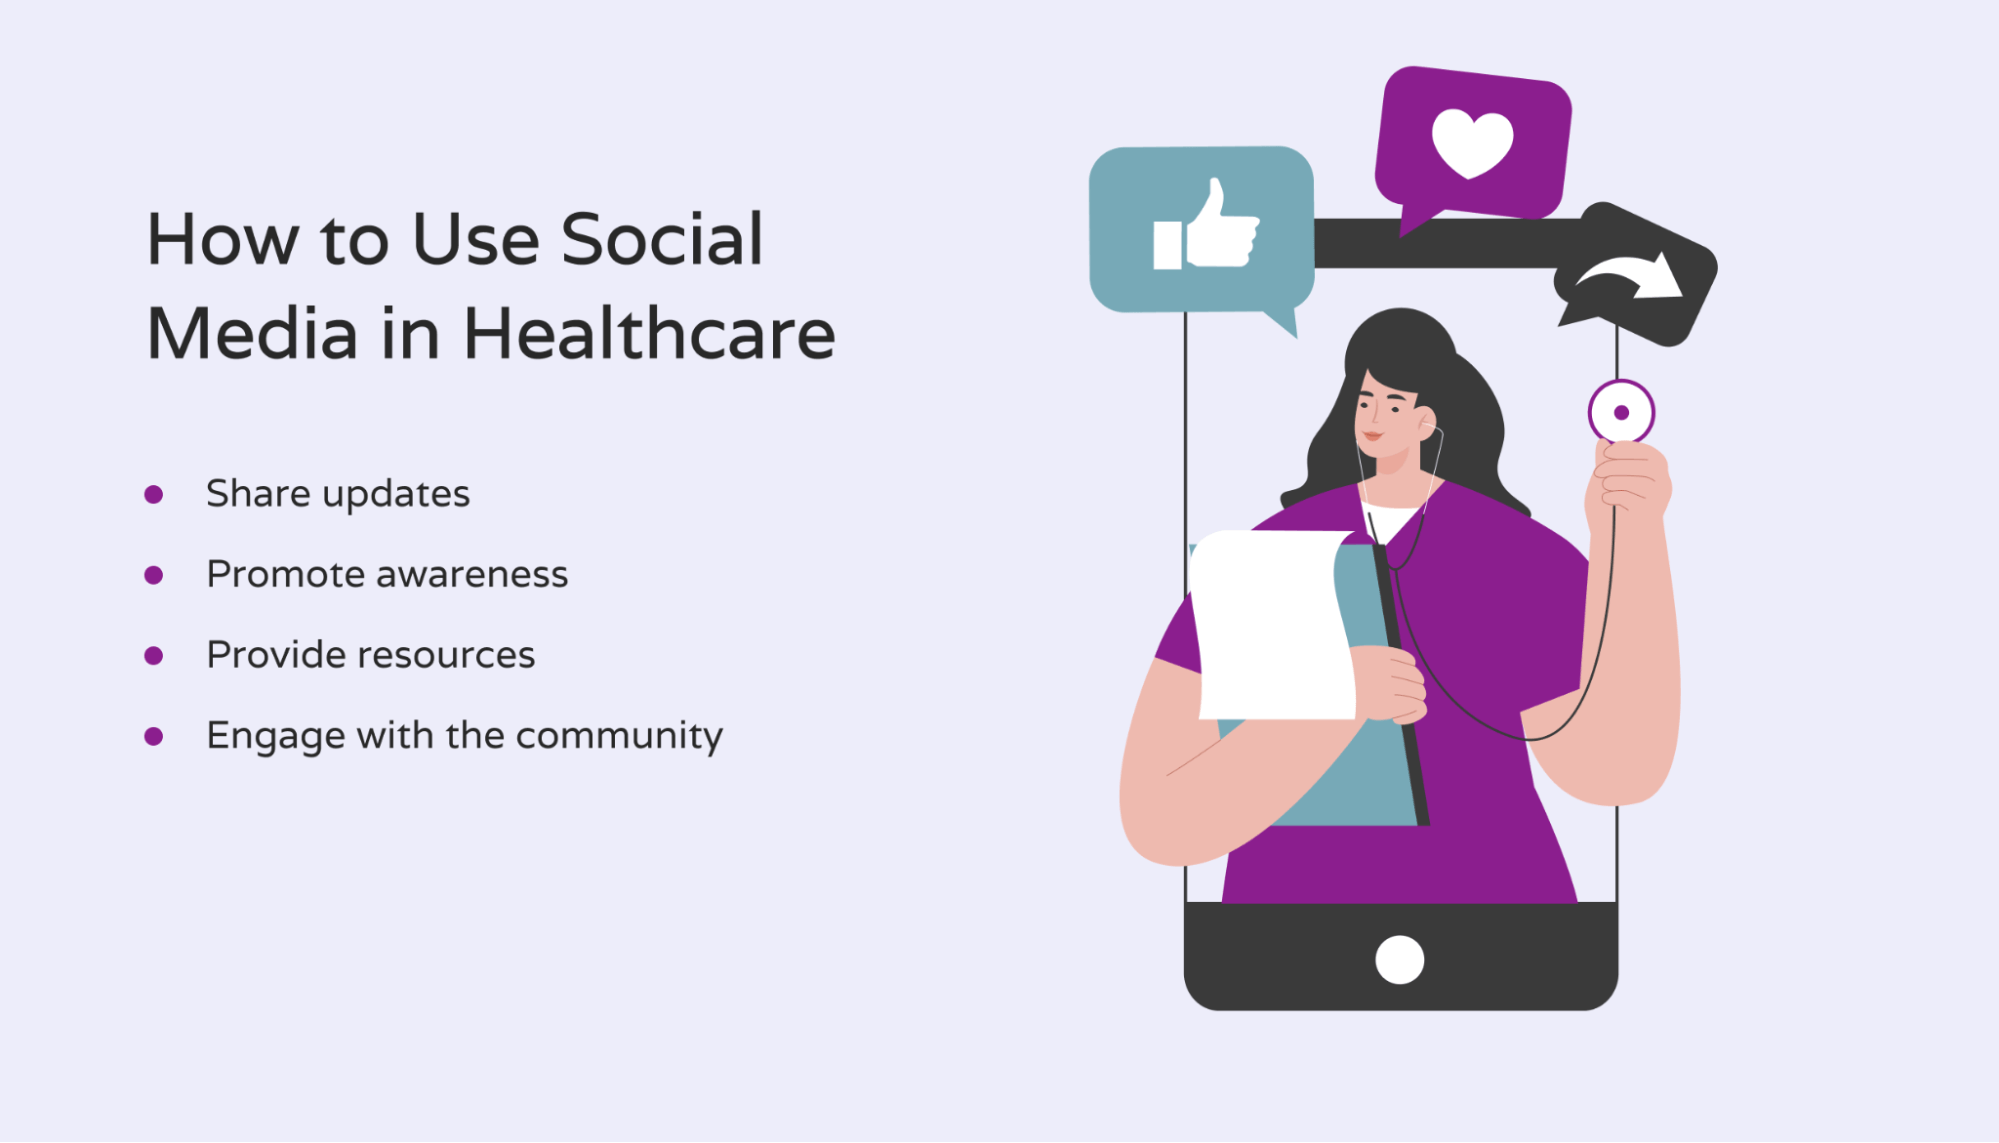 How to use social media in healthcare